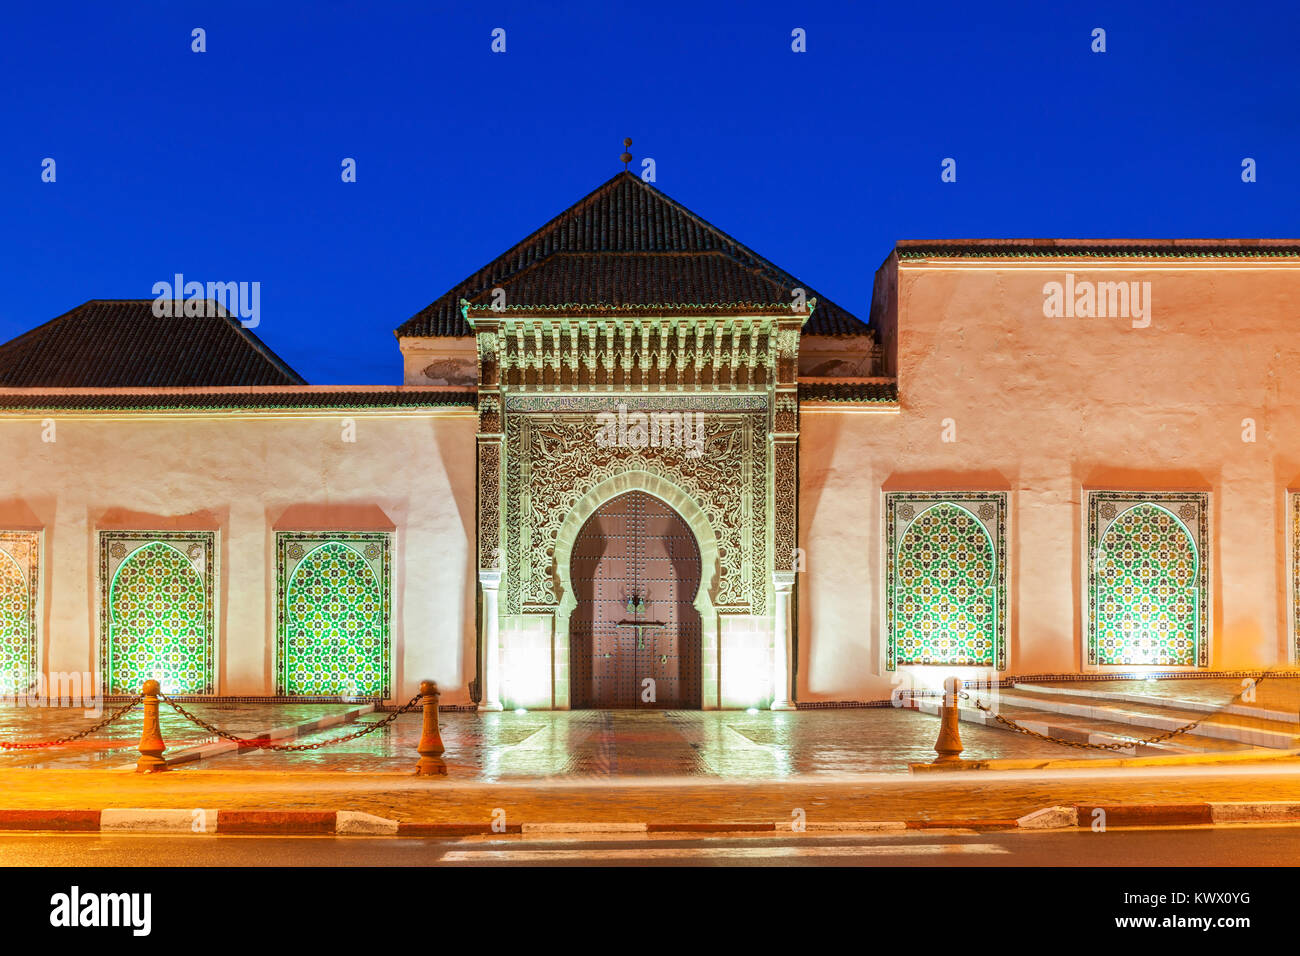 The Mausoleum of Moulay Ismail in Meknes in Morocco. Mausoleum of Moulay Ismail is a tomb and mosque located in the Morocco city of Meknes. Stock Photo